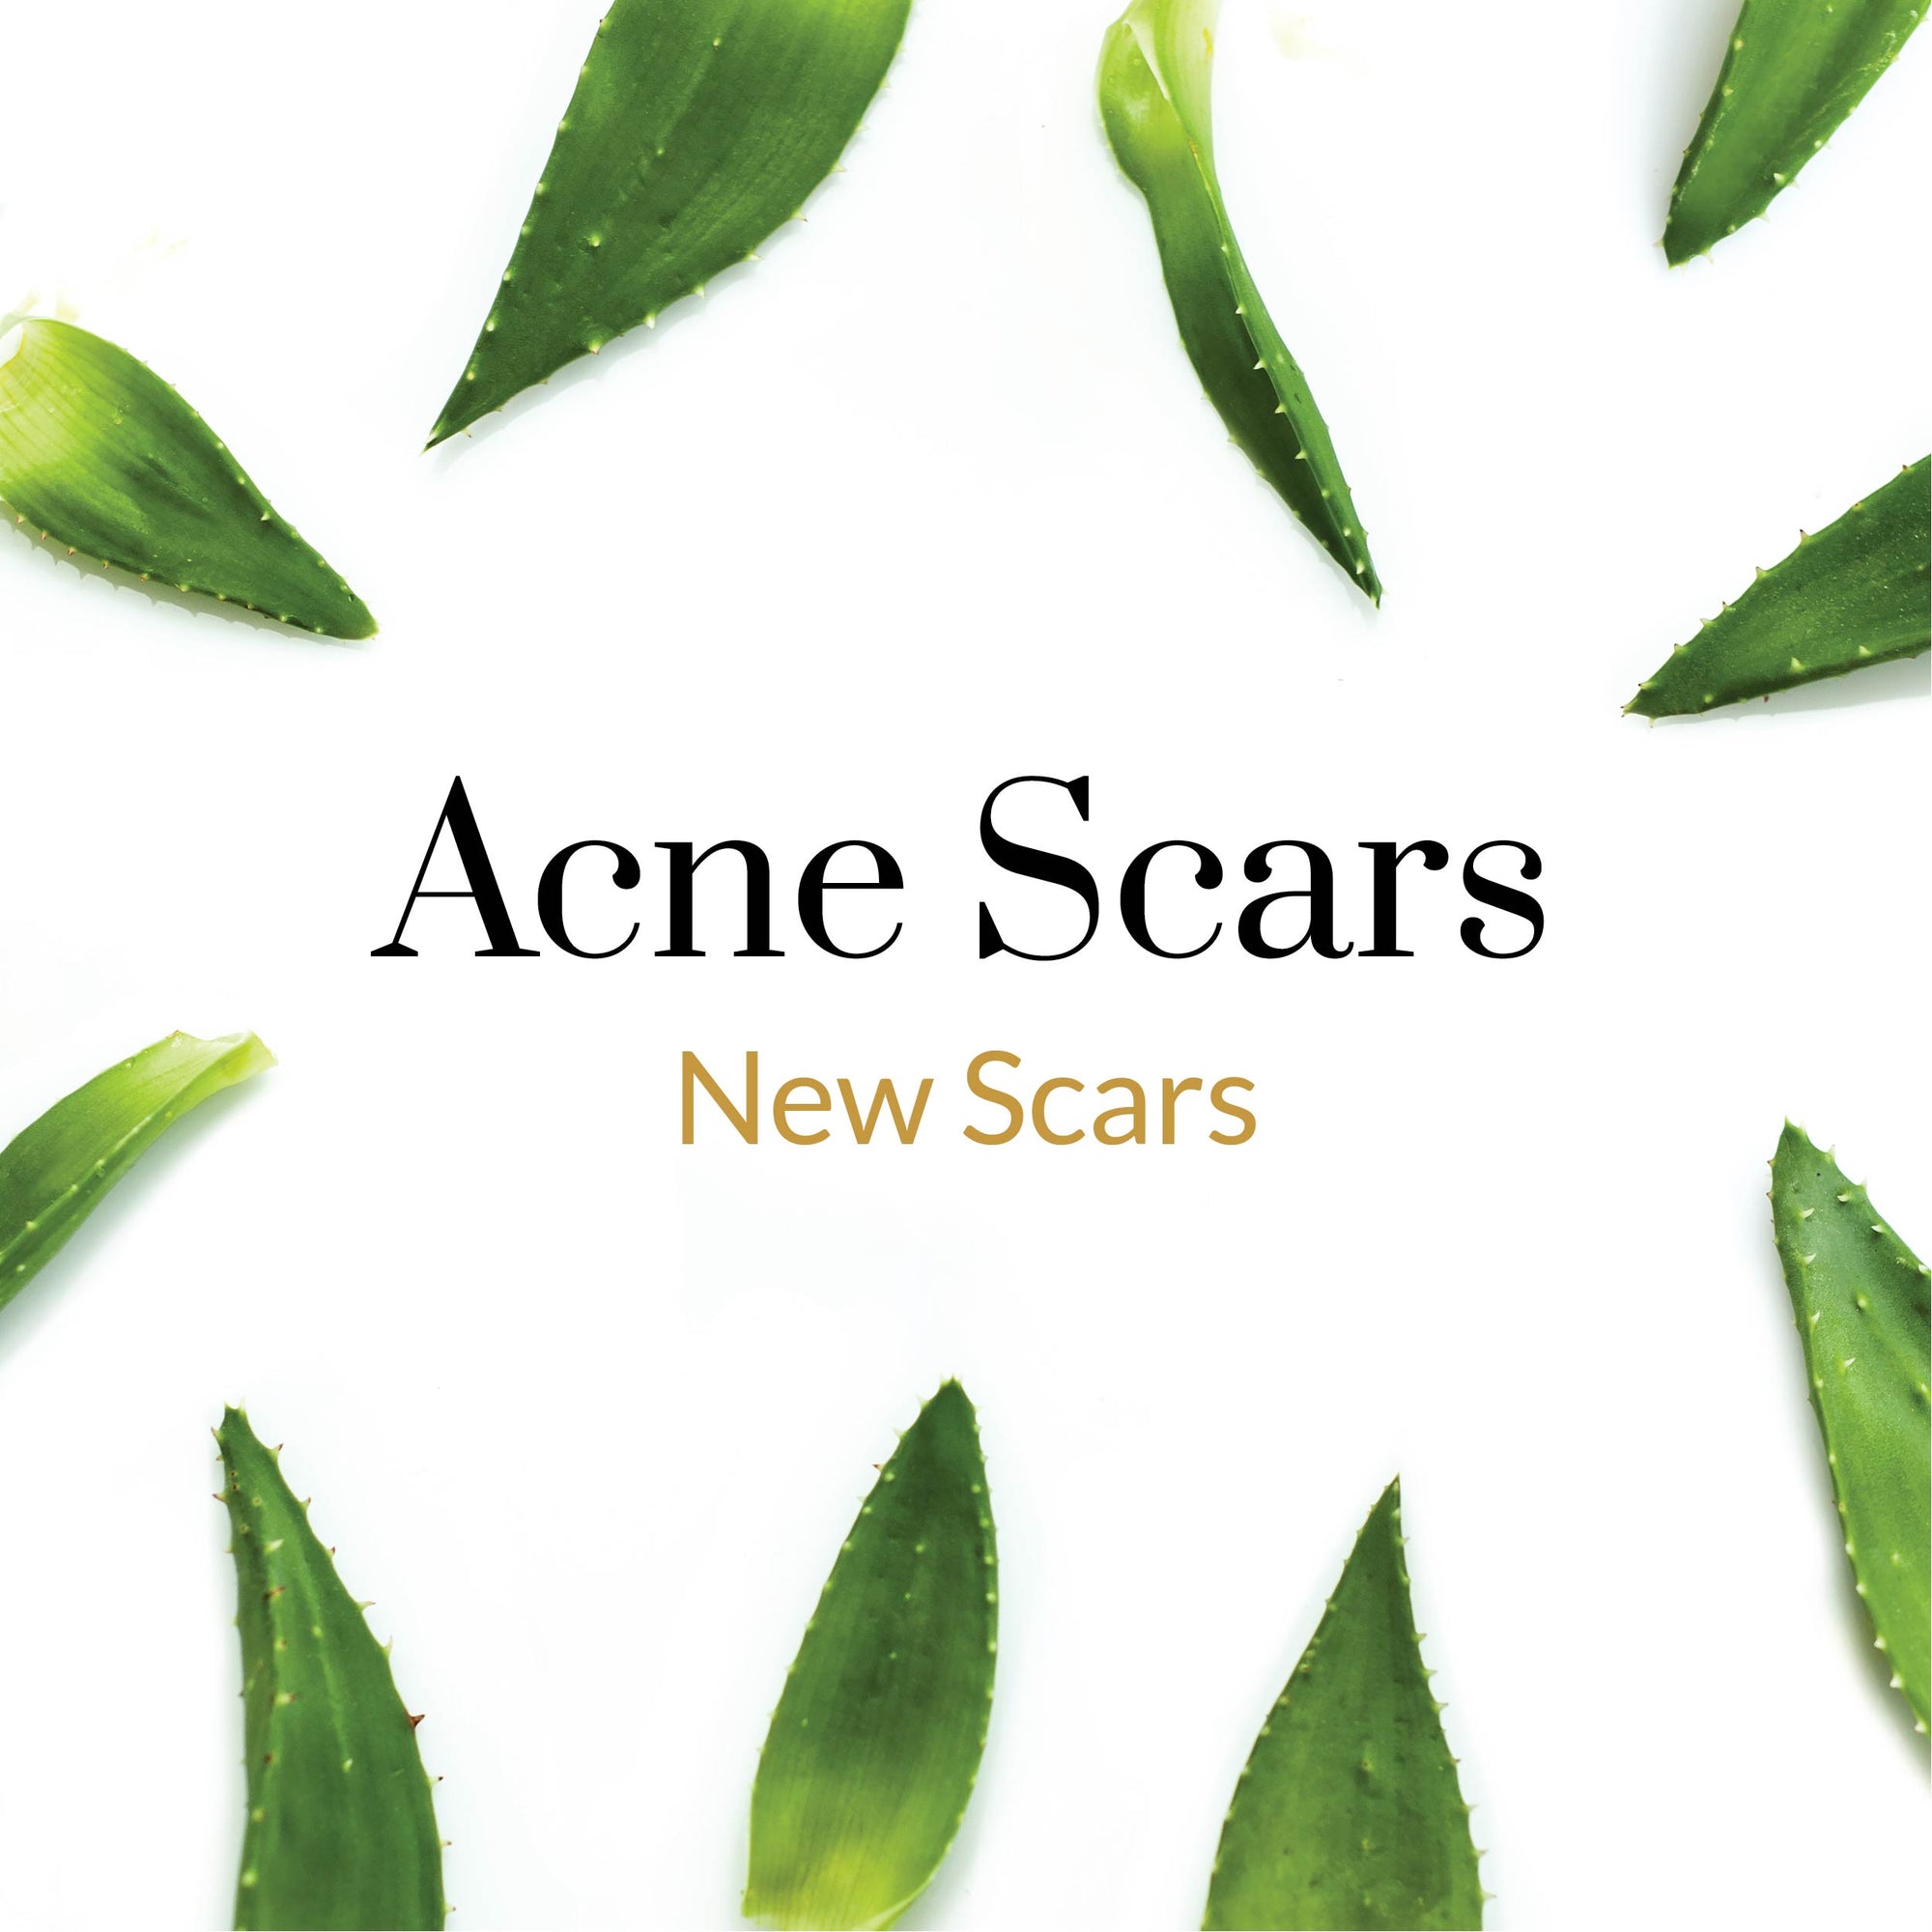 New Scars - Acne